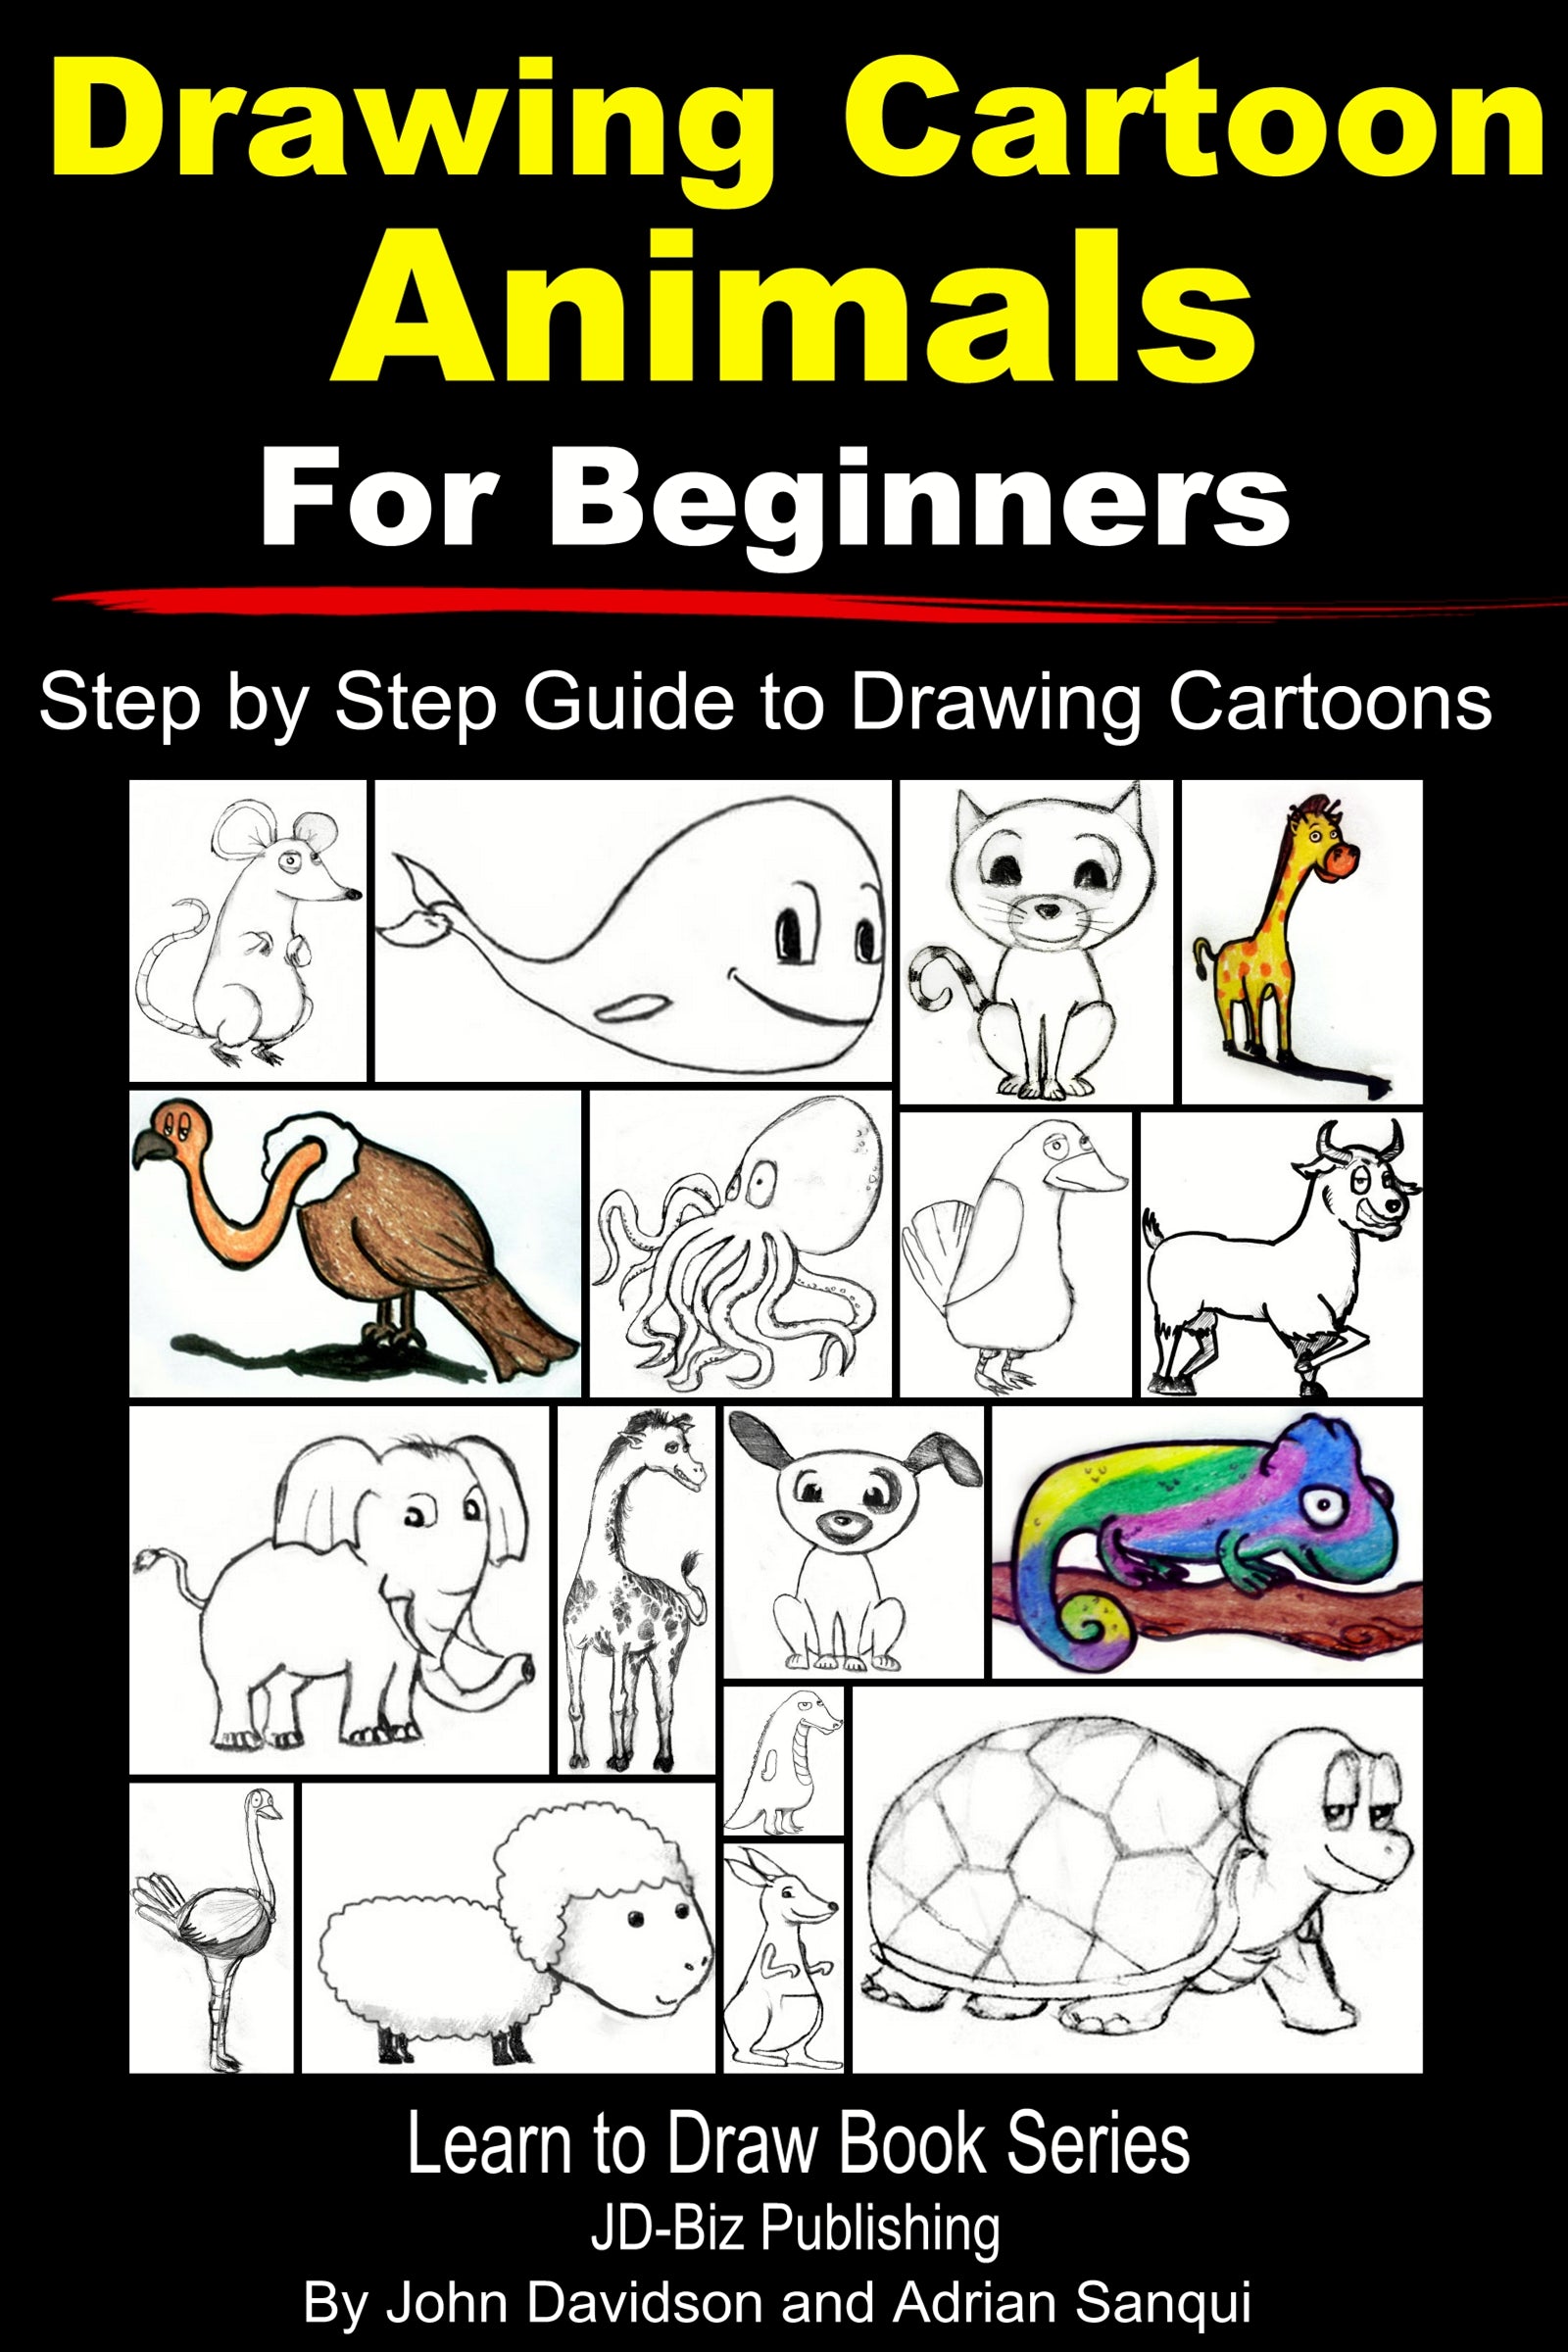 How to Draw Cartoon Faces in 8 Simple Steps - Kdan Mobile Blog